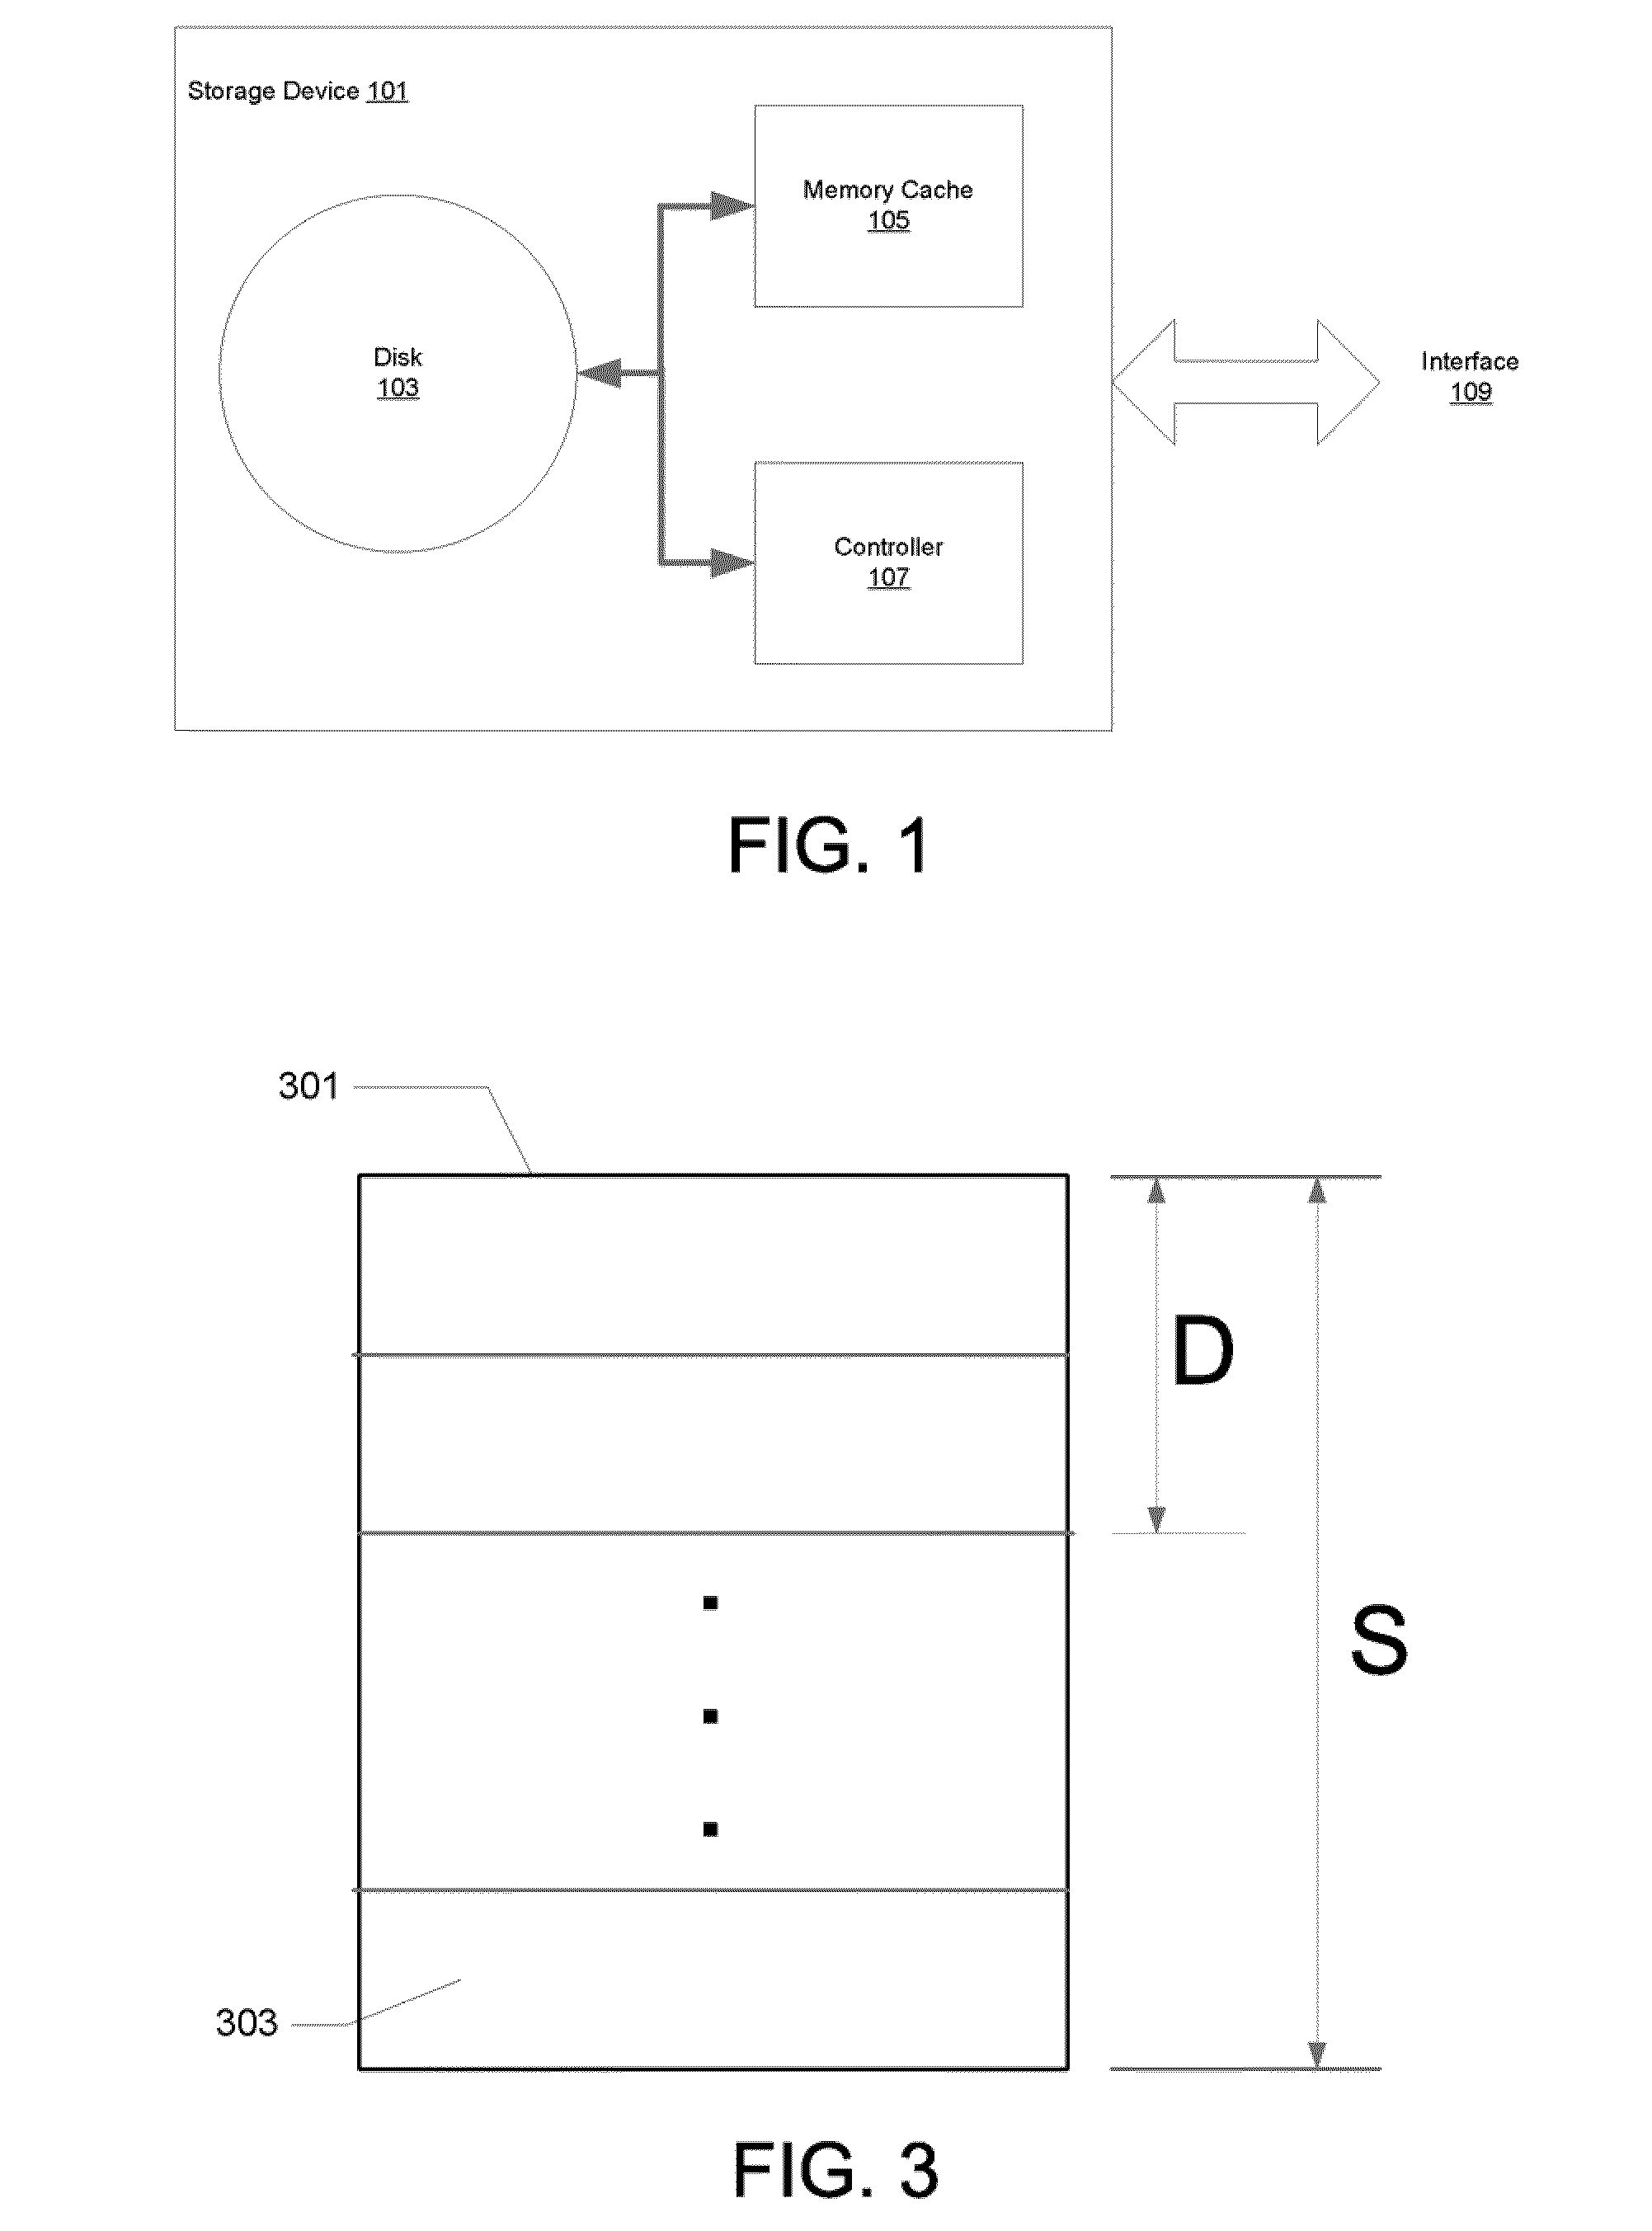 Systems and methods for avoiding performance degradation due to disk fragmentation in a network caching device